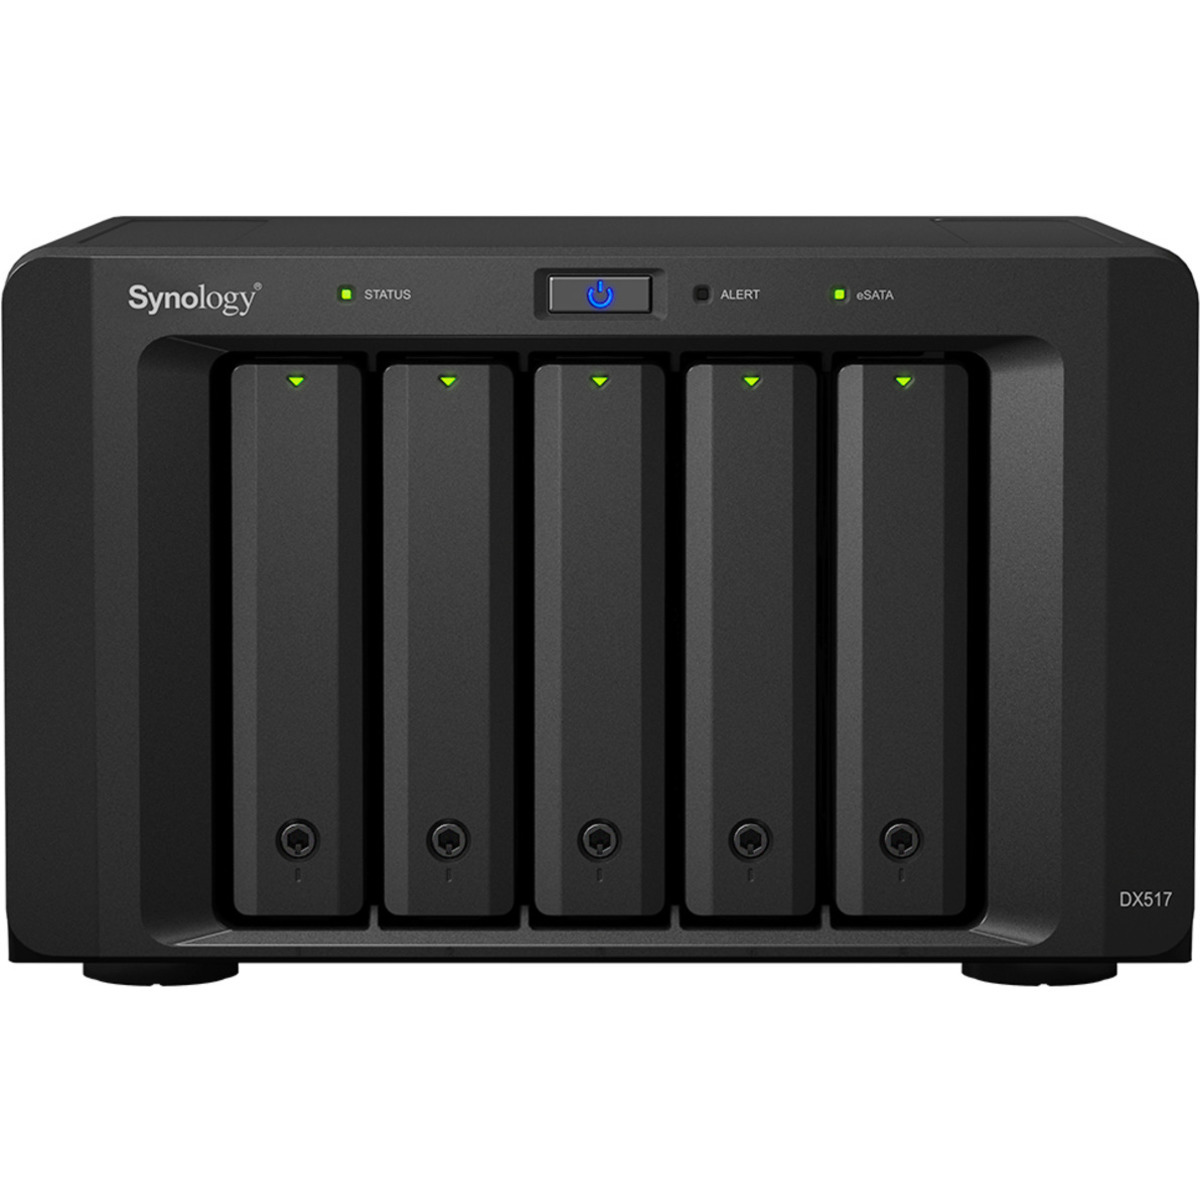 Synology DX517 External Expansion Drive 4tb 5-Bay Desktop Multimedia / Power User / Business Expansion Enclosure 4x1tb Samsung 870 EVO MZ-77E1T0BAM 2.5 560/530MB/s SATA 6Gb/s SSD CONSUMER Class Drives Installed - Burn-In Tested DX517 External Expansion Drive